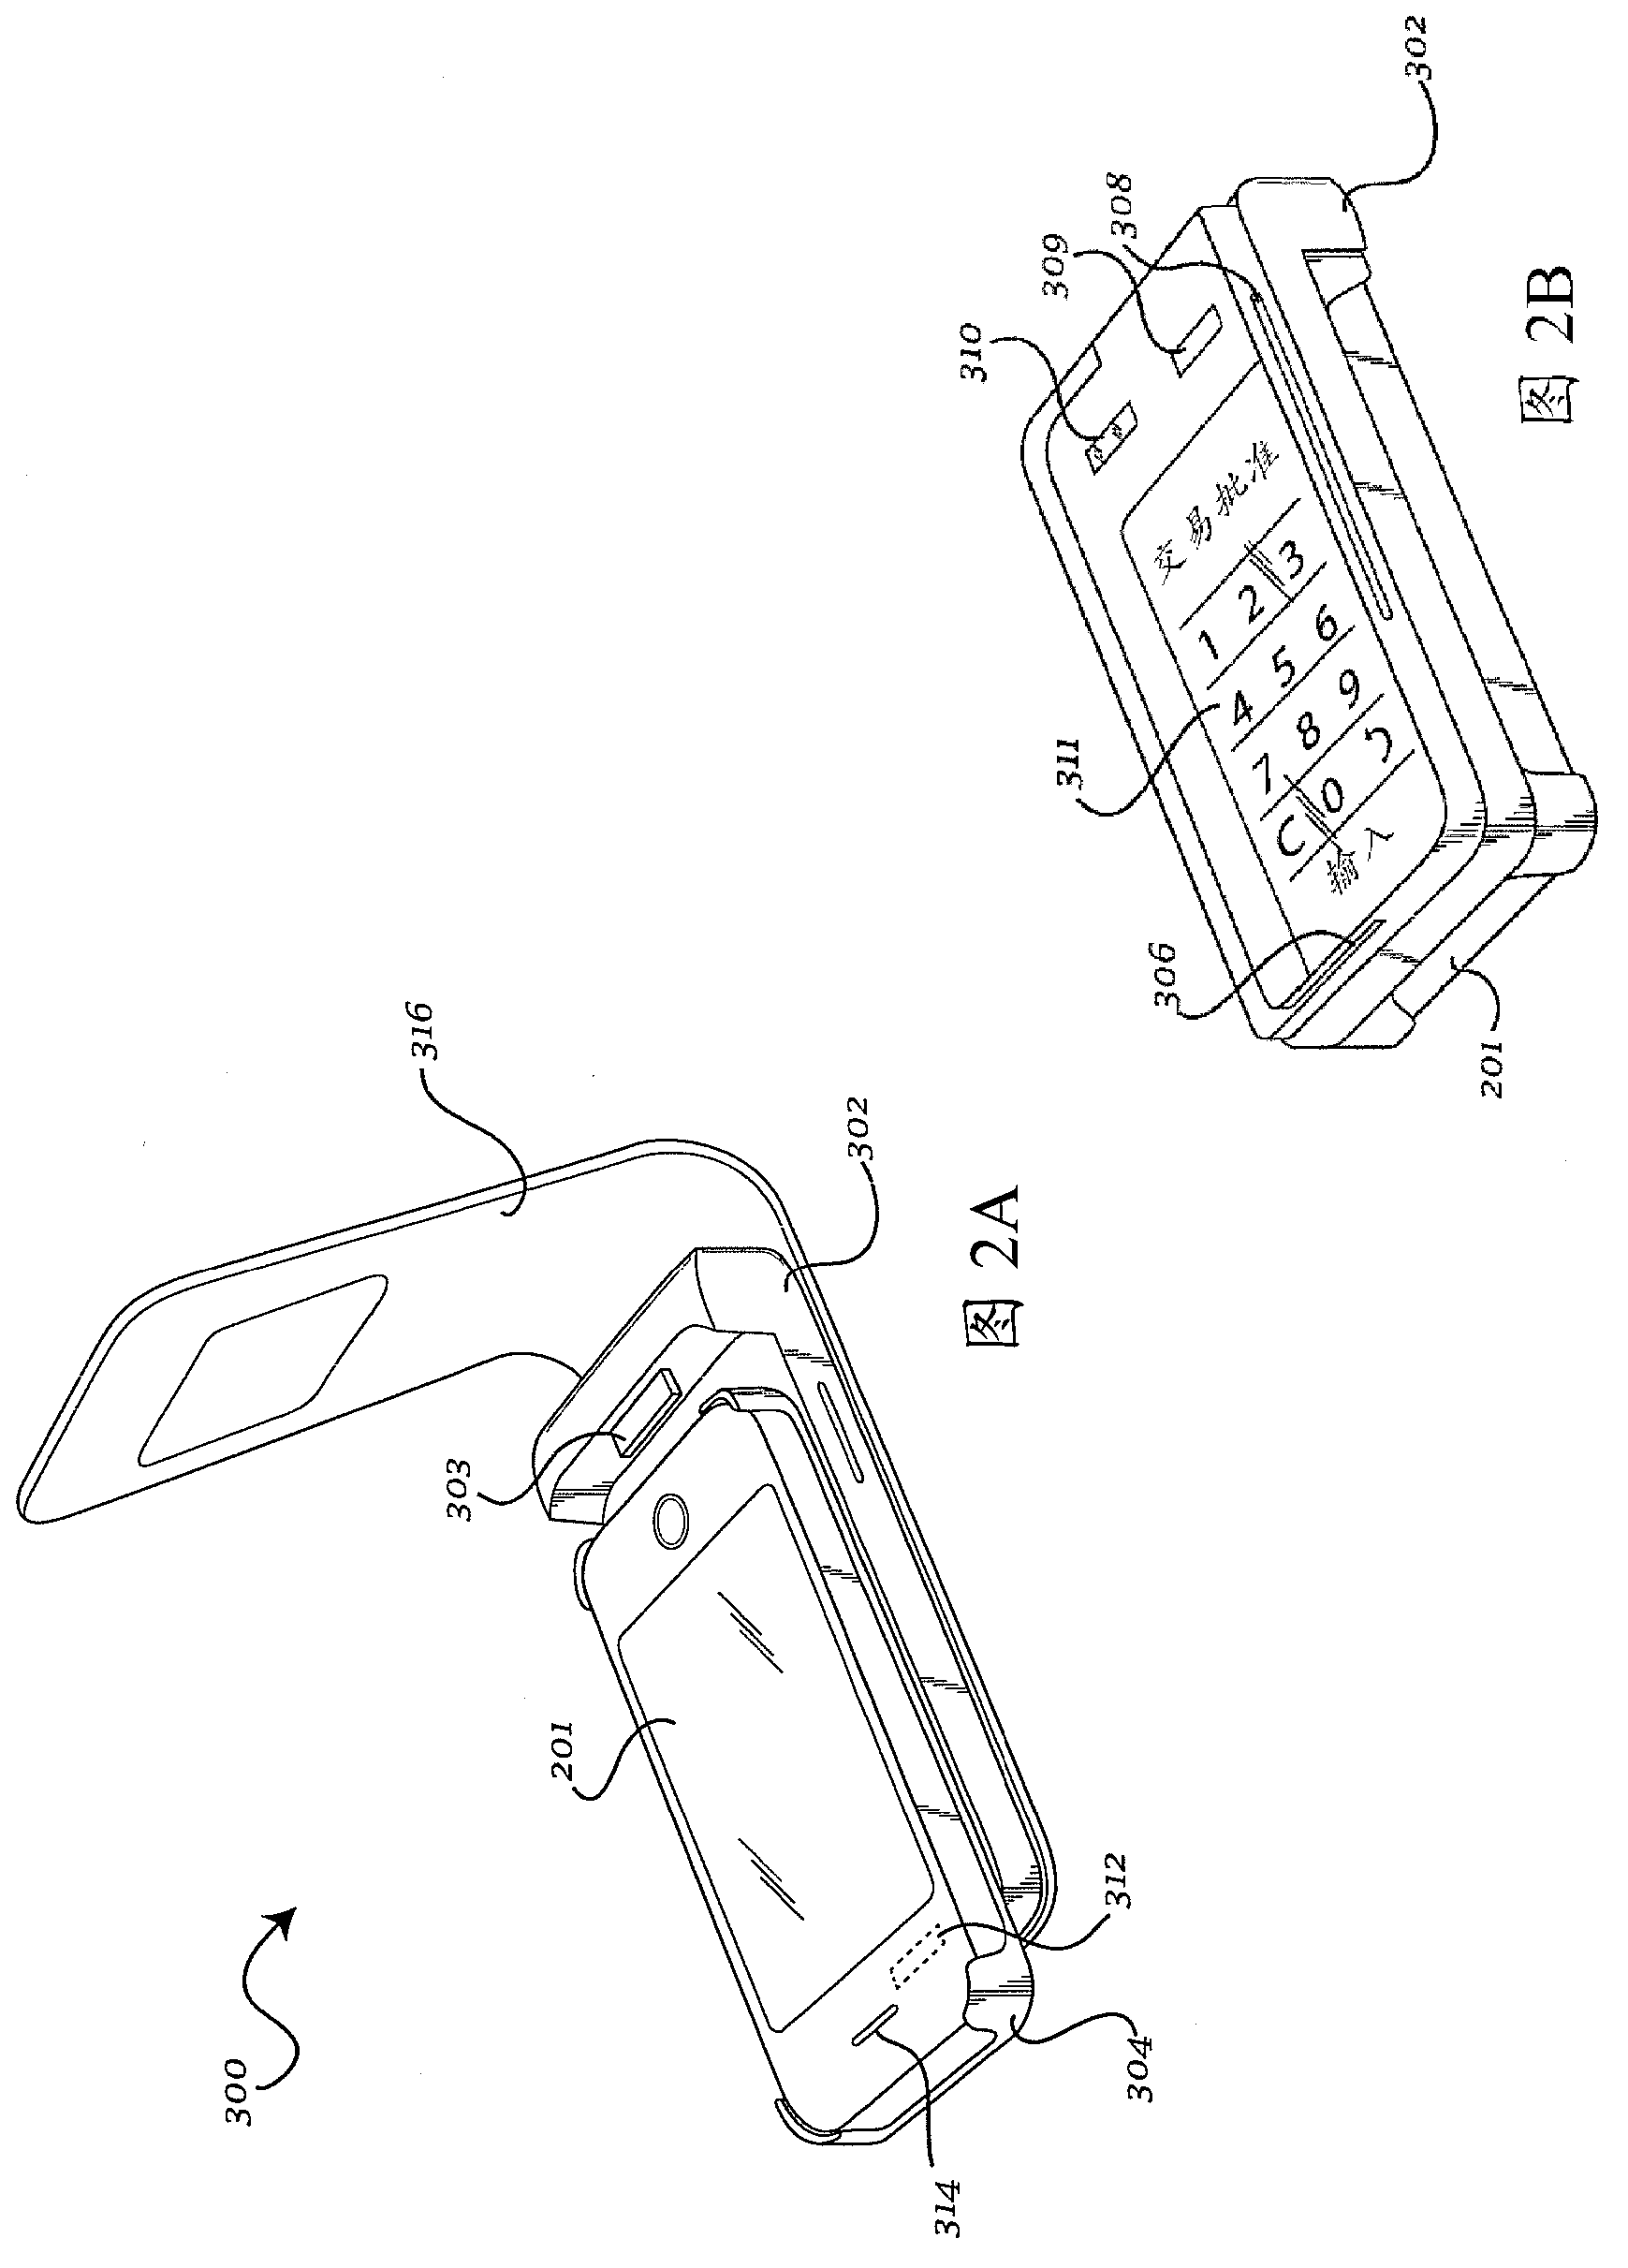 System, method, and apparatus to facilitate commerce and sales